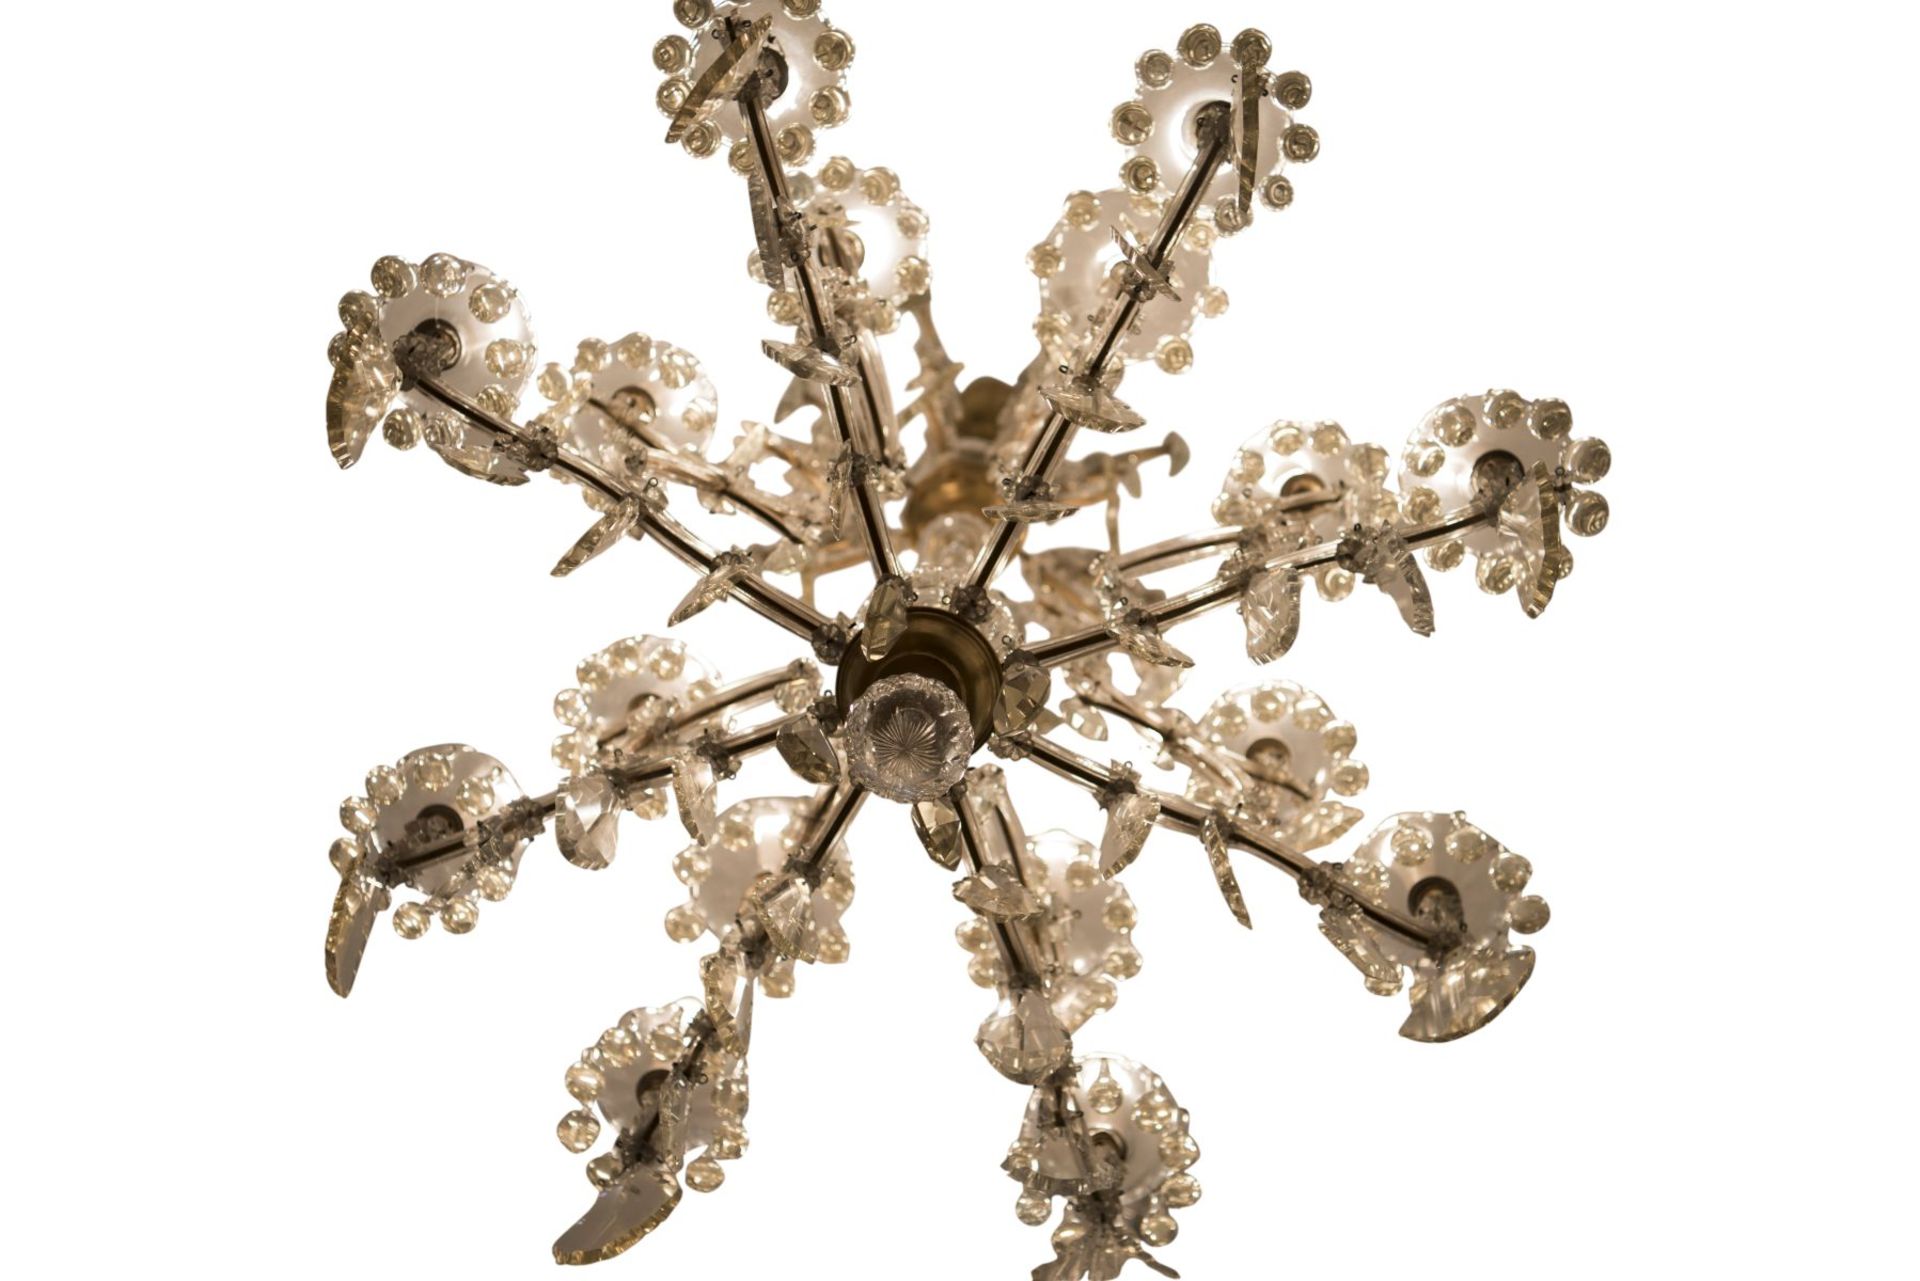 Decorative Salon Chandelier, Maria Theresia Style | Dekorativer Salon Luster, Maria Theresia Stil - Image 8 of 8